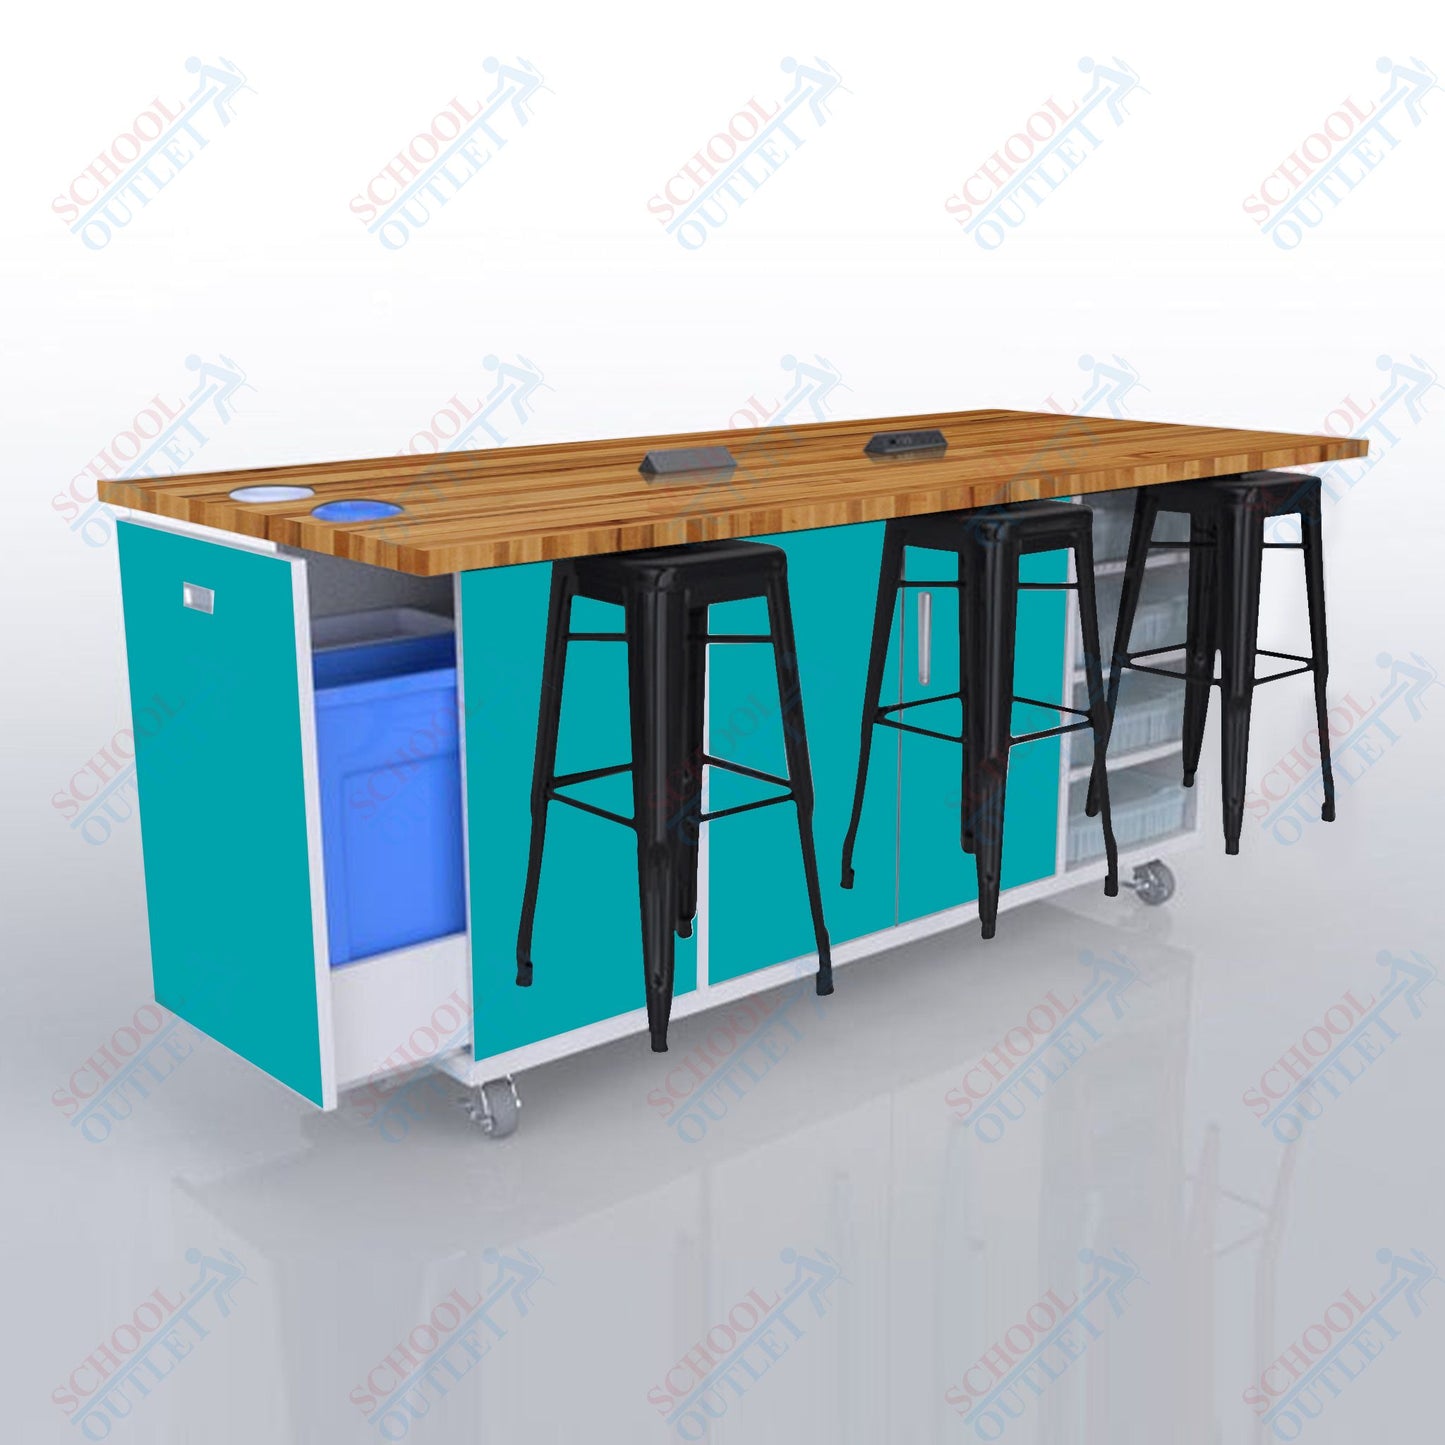 CEF ED Original Table 42"H Butcher Block Top, Laminate Base with  6 Stools, Storage Bins, Trash Bins, and Electrical Outlets Included.